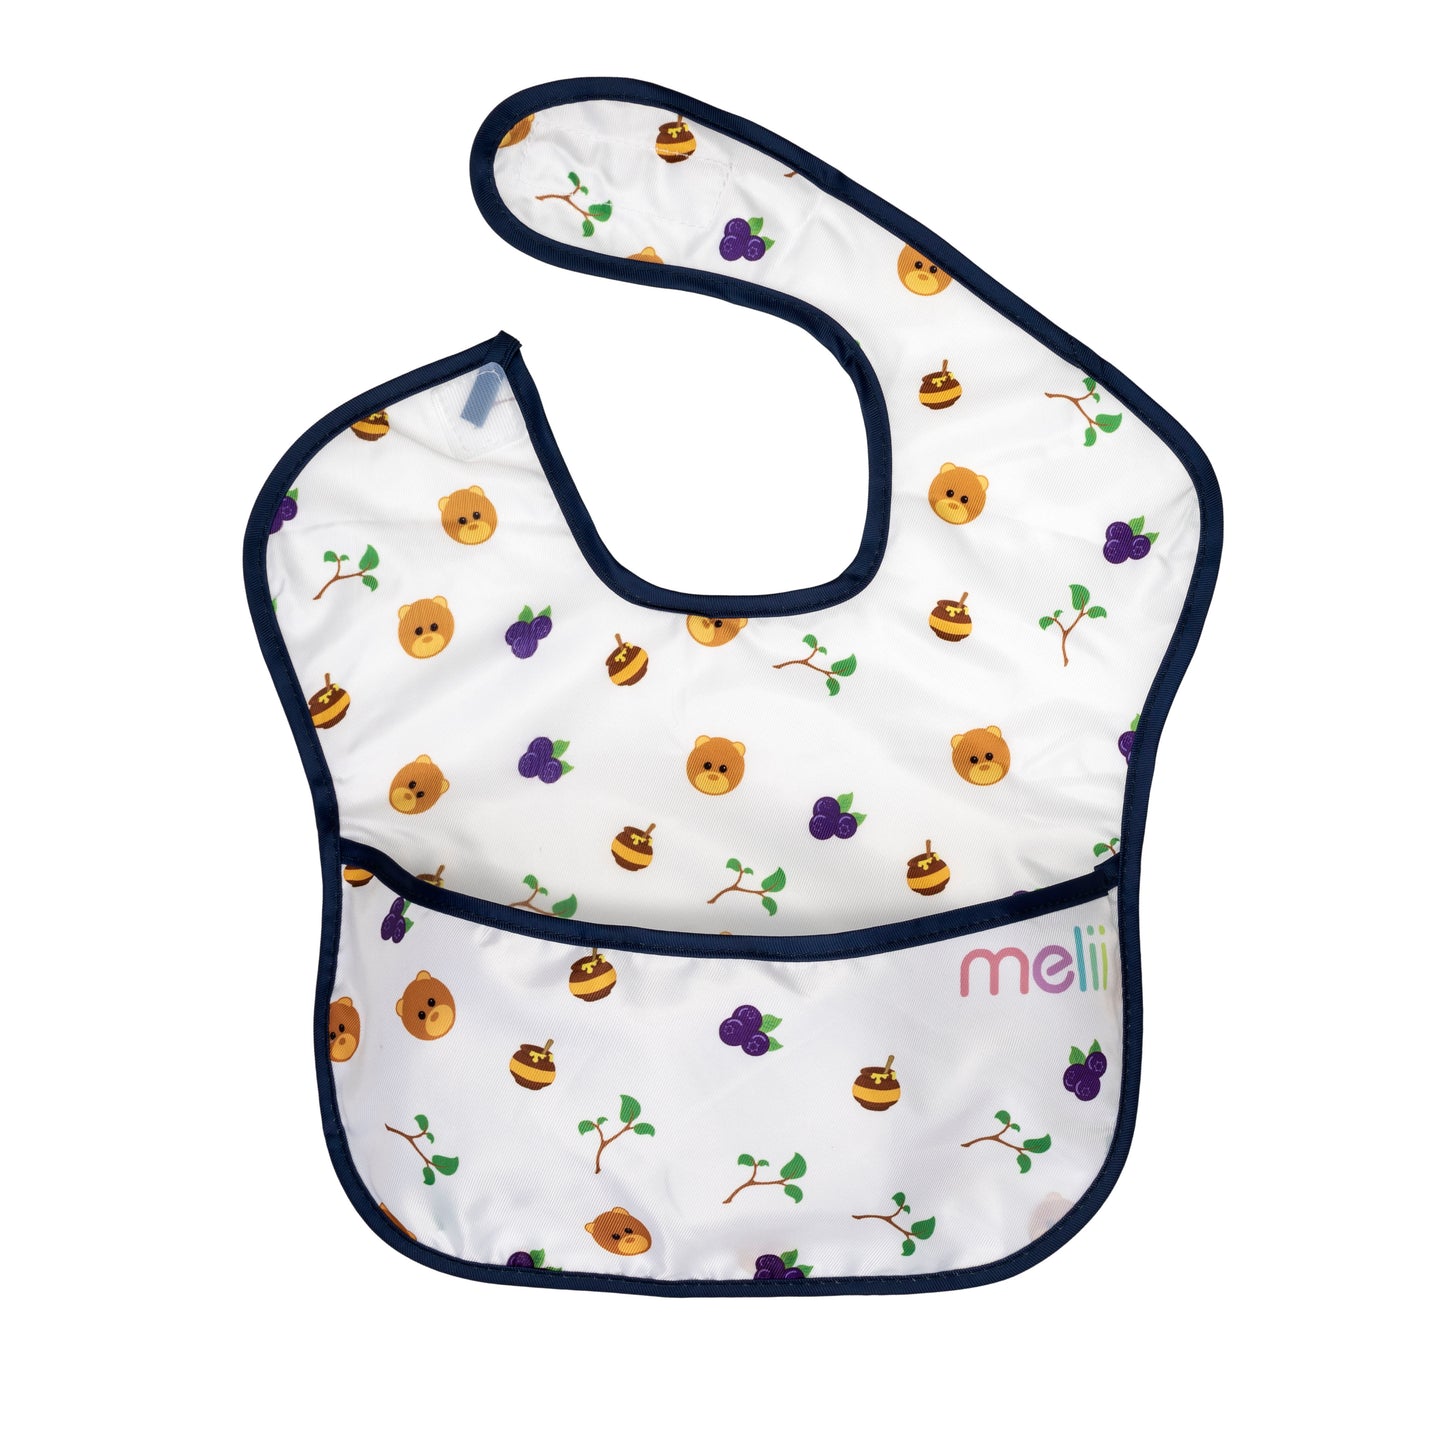 melii Fold Up Bib 2-Pack - Water-Resistant and Playful Bear Design, Adjustable Velcro, Deep Spill Pocket - Perfect for On-the-Go Parents and Messy Mealtimes